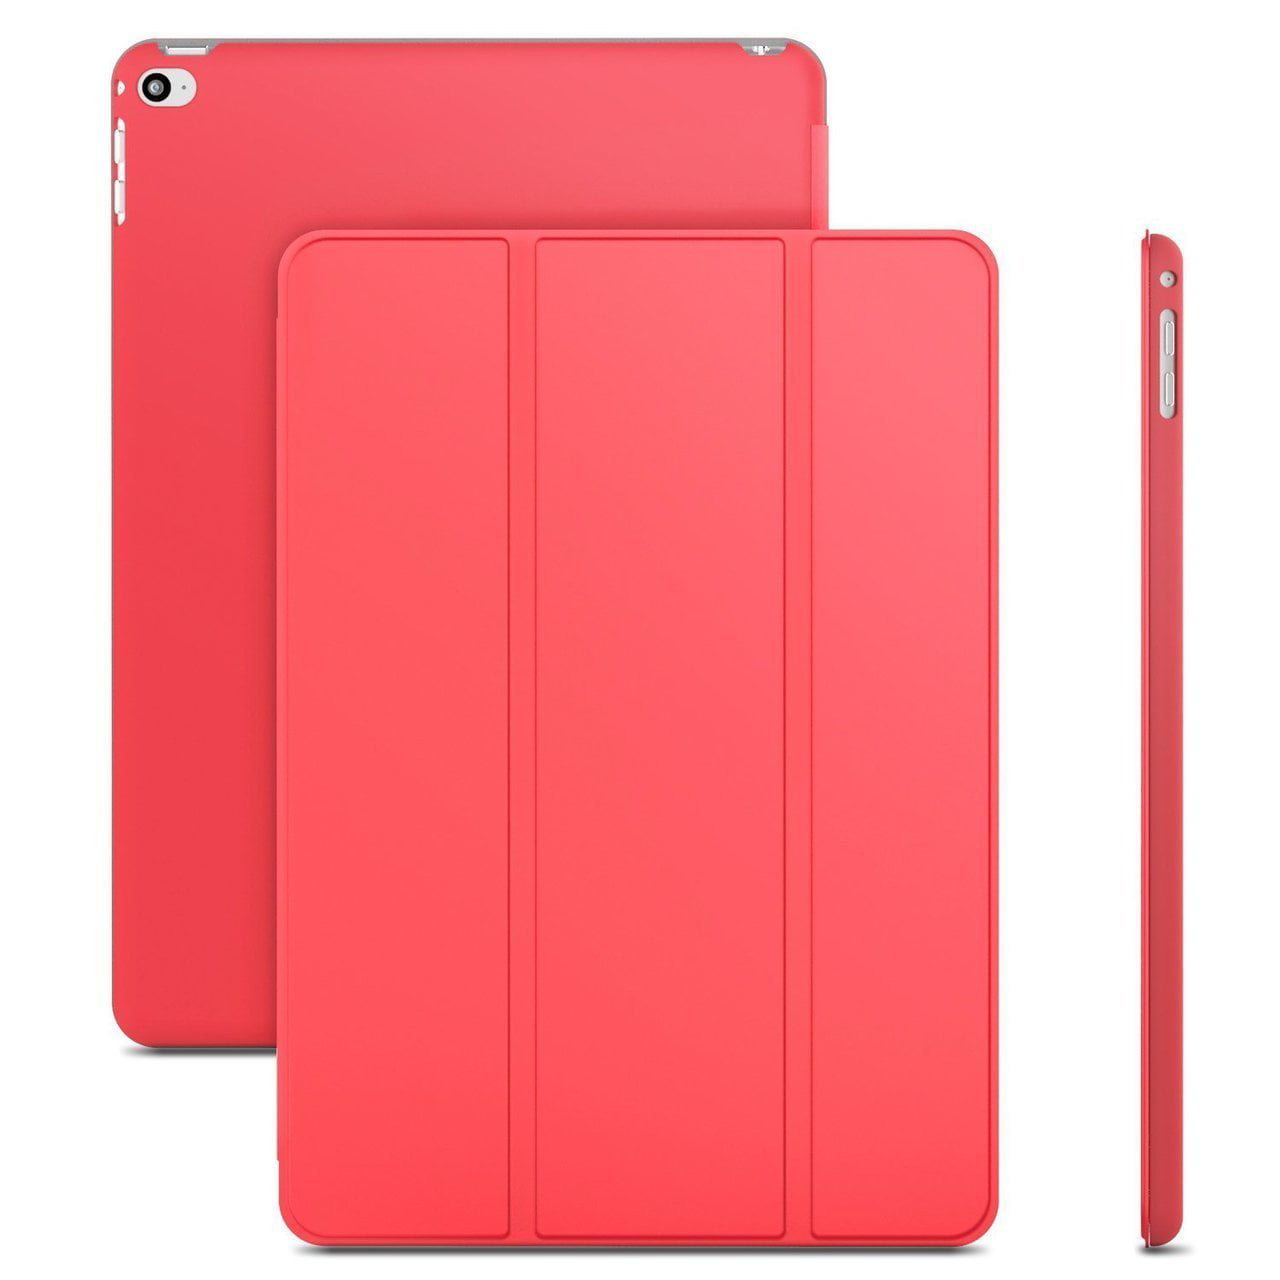 iPad Air 2 Case, SuprJETech® iPad Air 2 Slim-Fit Smart Case Cover for Apple iPad Air 2 (iPad 2014 Model Ultra Slim Lightweight Stand with Smart Cover Auto Wake/Sleep (Red) - Walmart.com